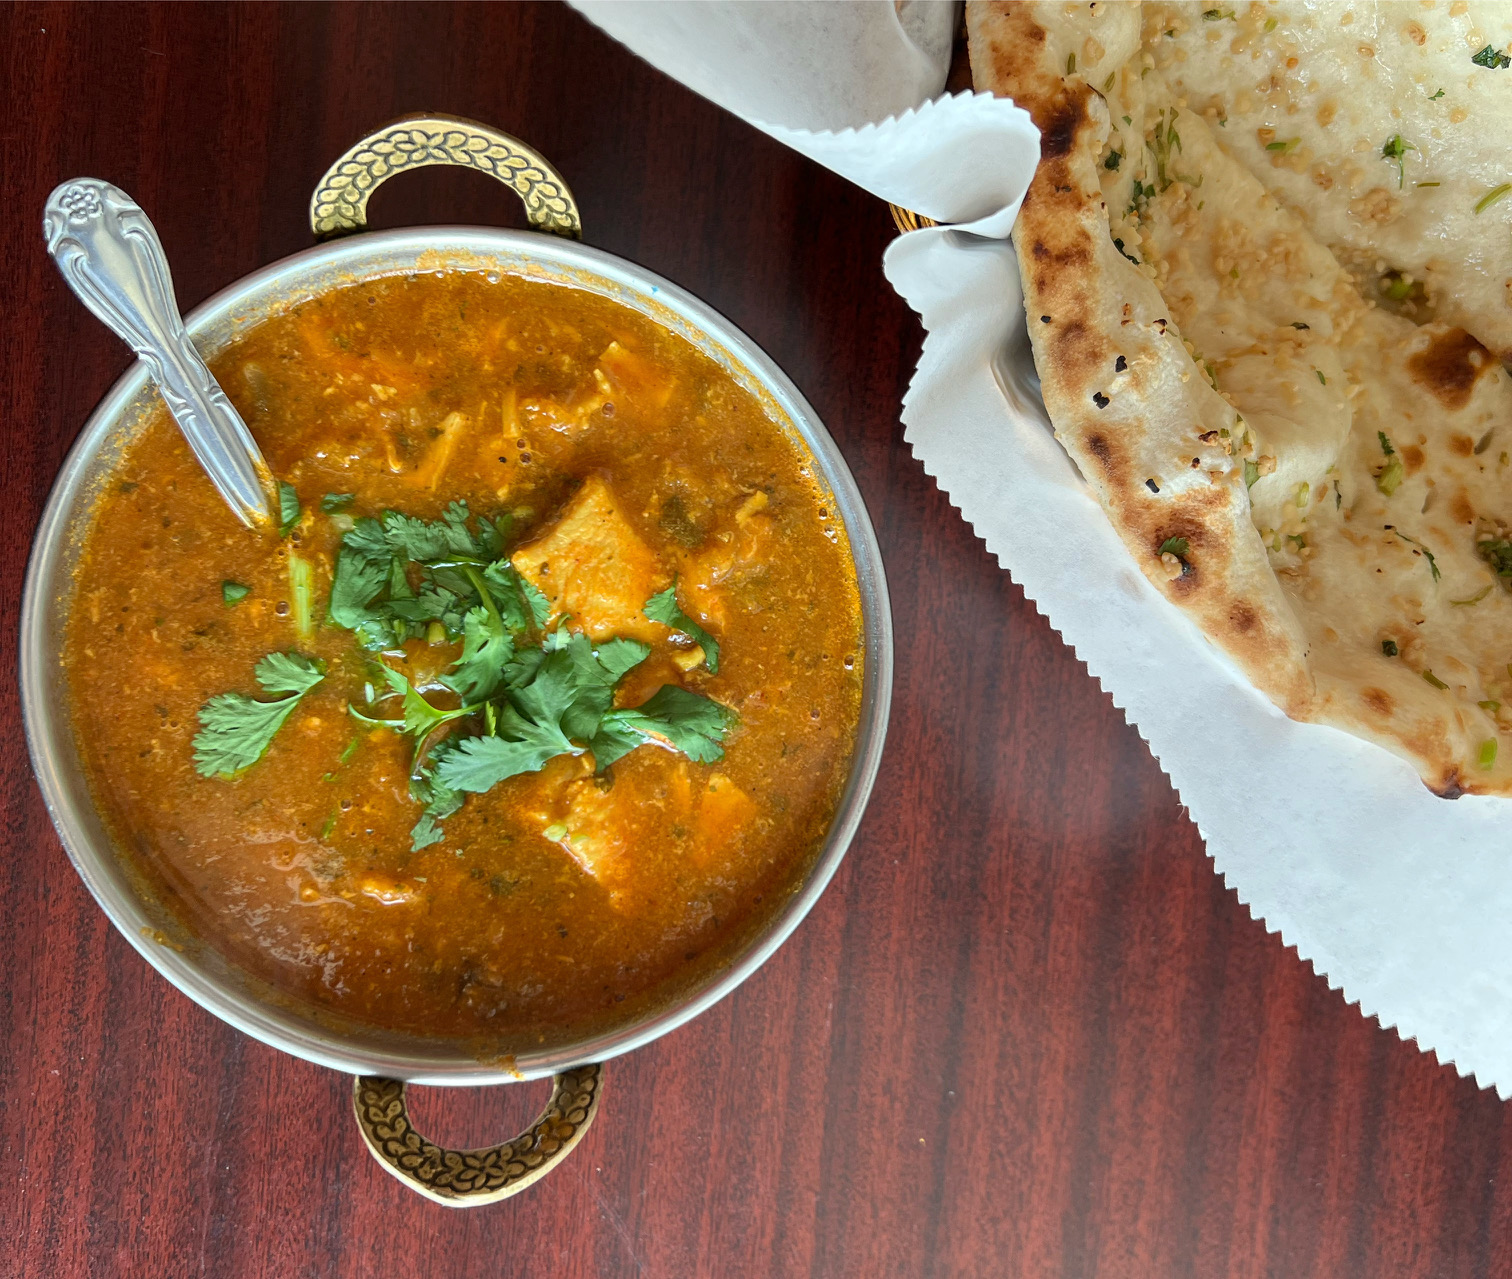 On a brown table, there is a brass bowl of chicken curry beside a basket of garlic naan. Photo by Alyssa Buckley.